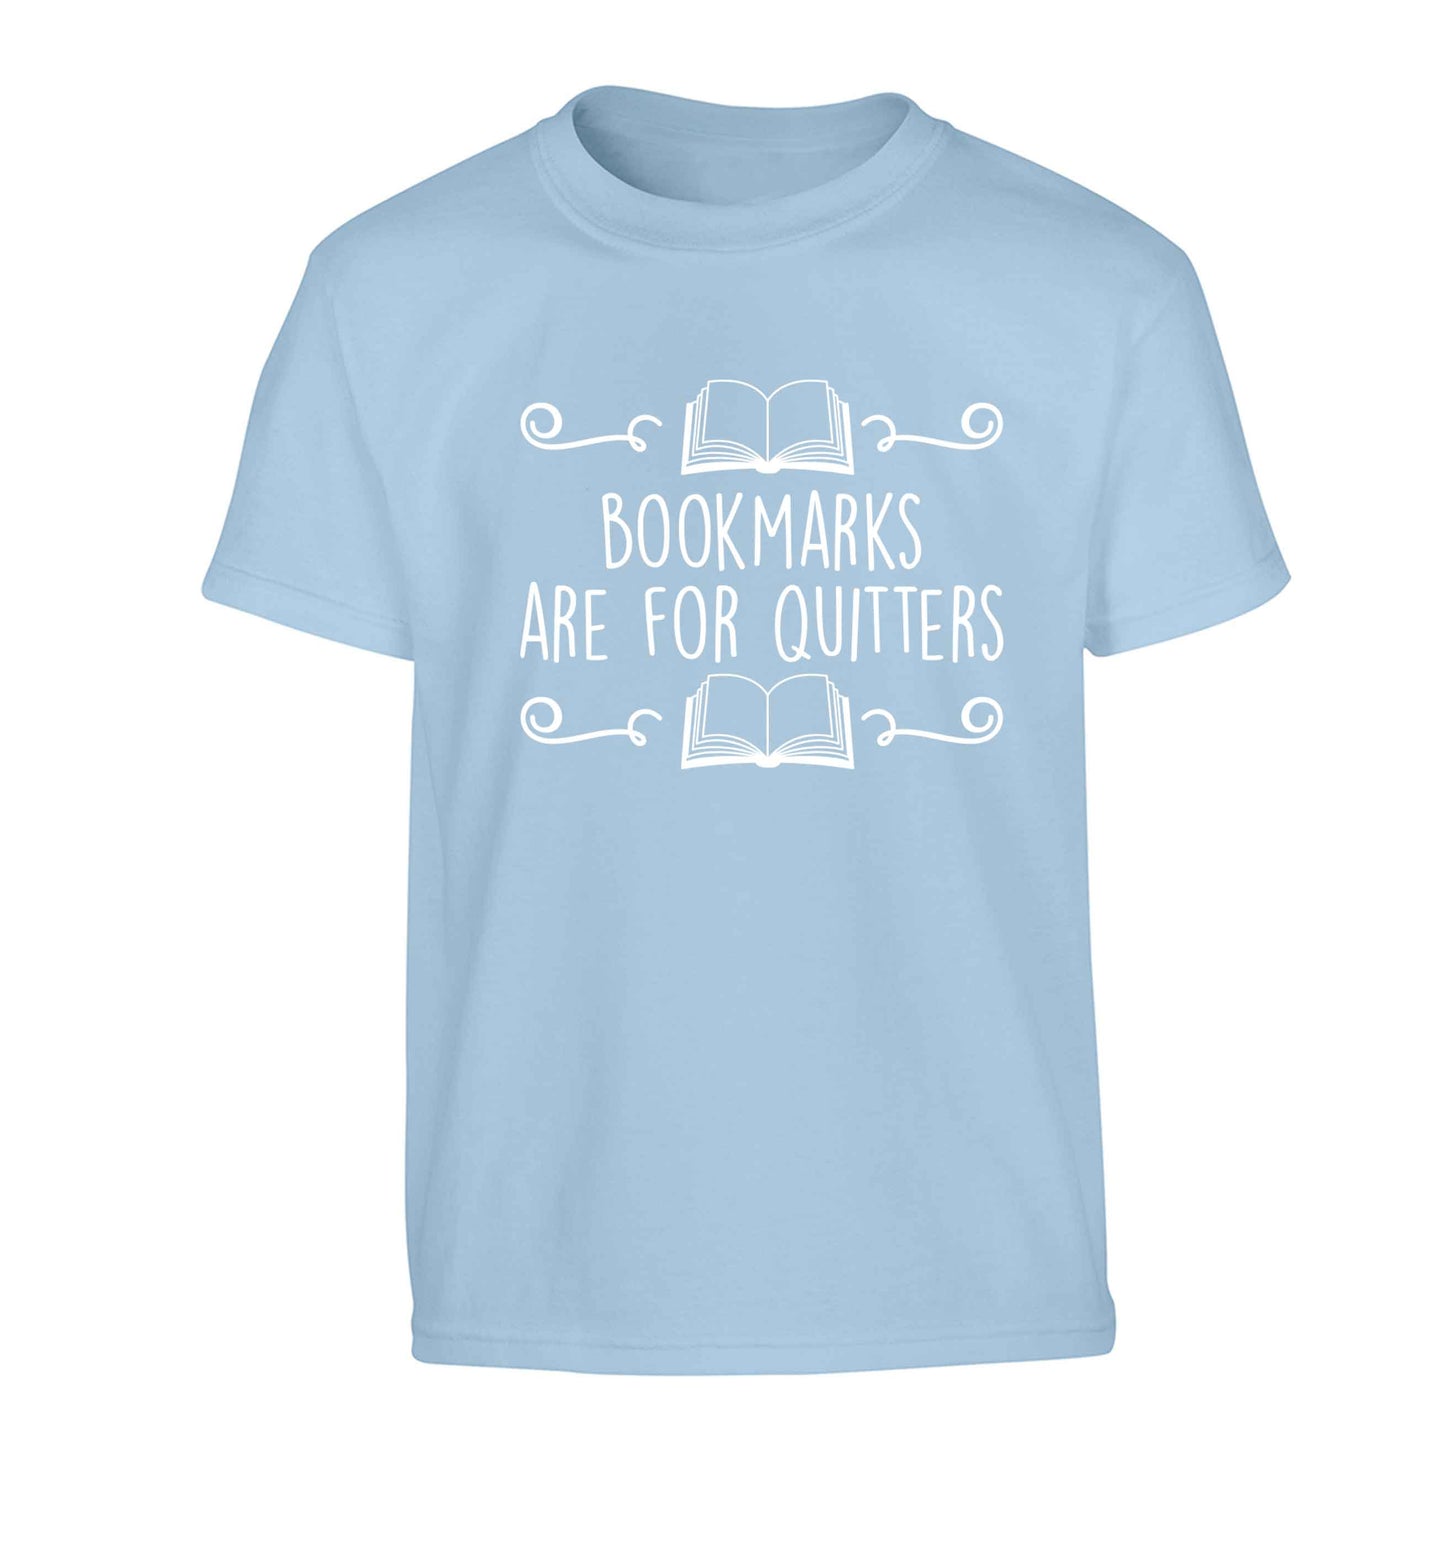 Bookmarks are for quitters Children's light blue Tshirt 12-13 Years